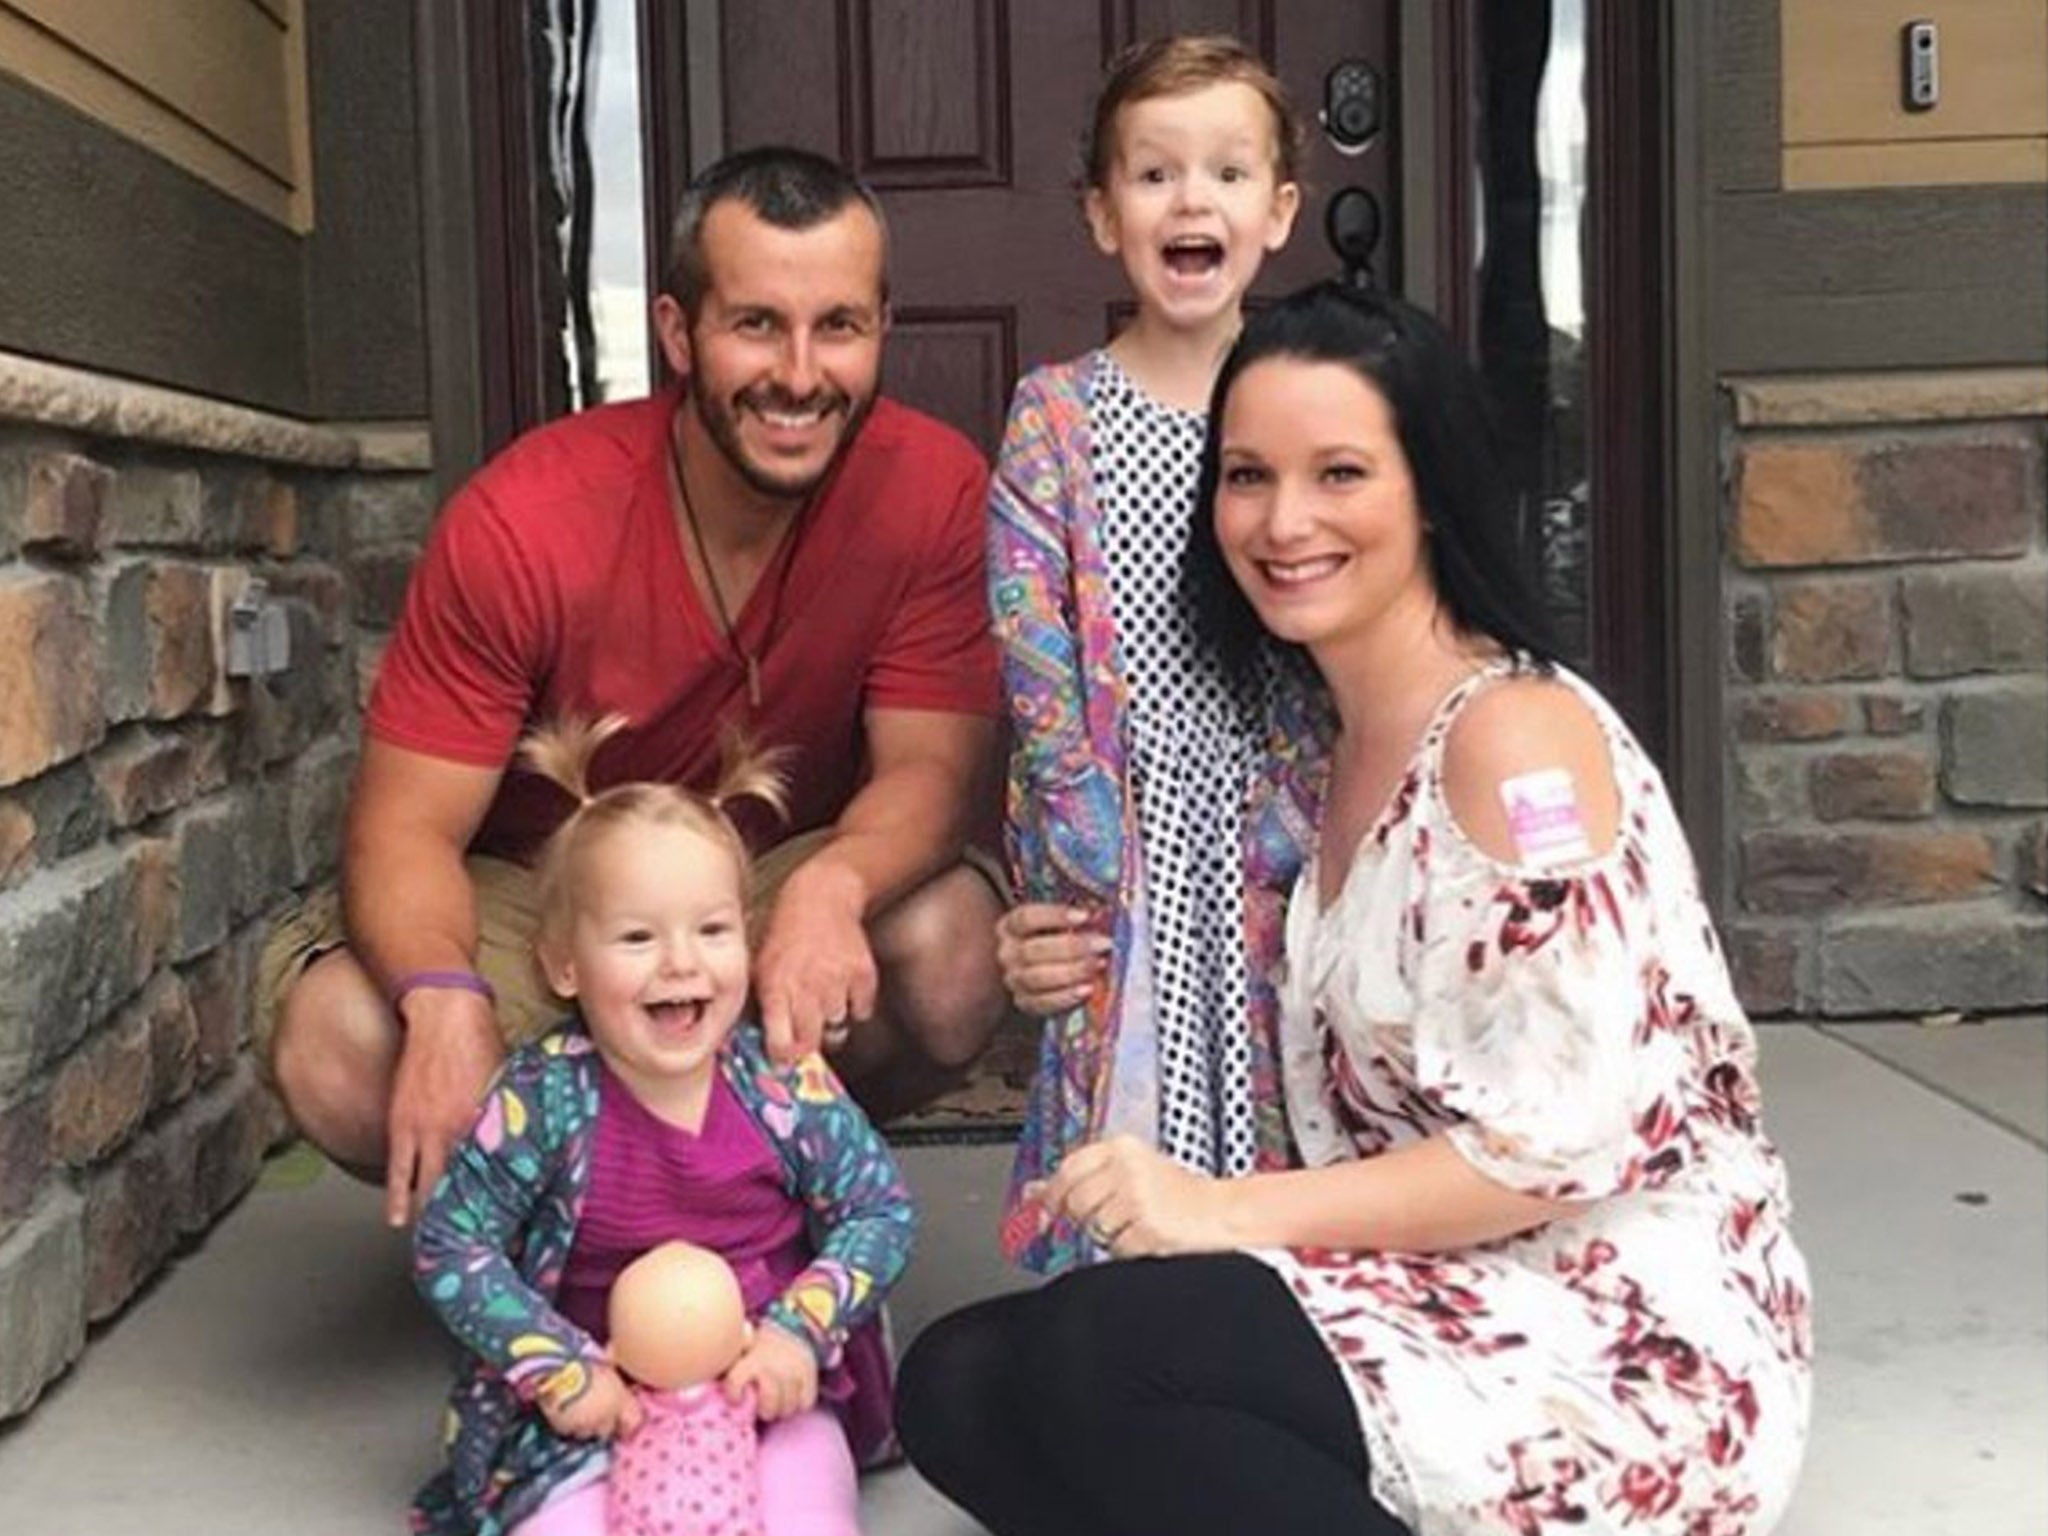 Chris Watts is currently serving life in prison after pleading guilty to murdering his wife, Shanann, along with their unborn son and their daughters Bella, 4, and Celeste, 3